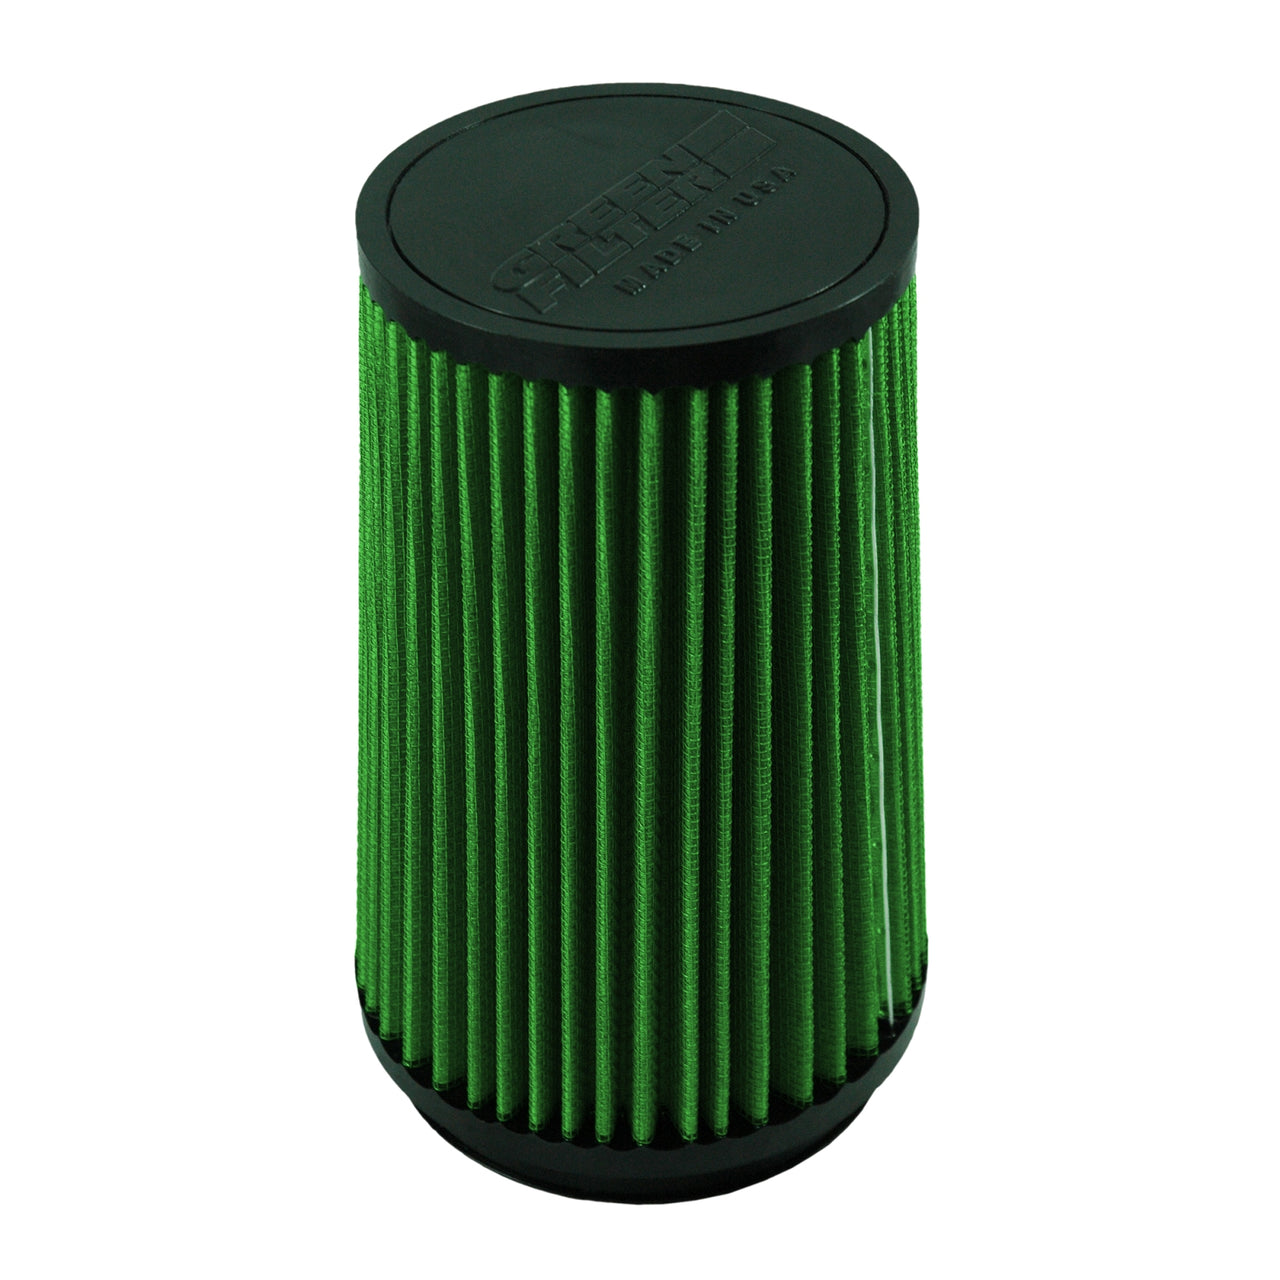 Green Filter Cone Filter - ID 4.5in. / Base 5.5in. / Top 4.75in. / H 8.375in.